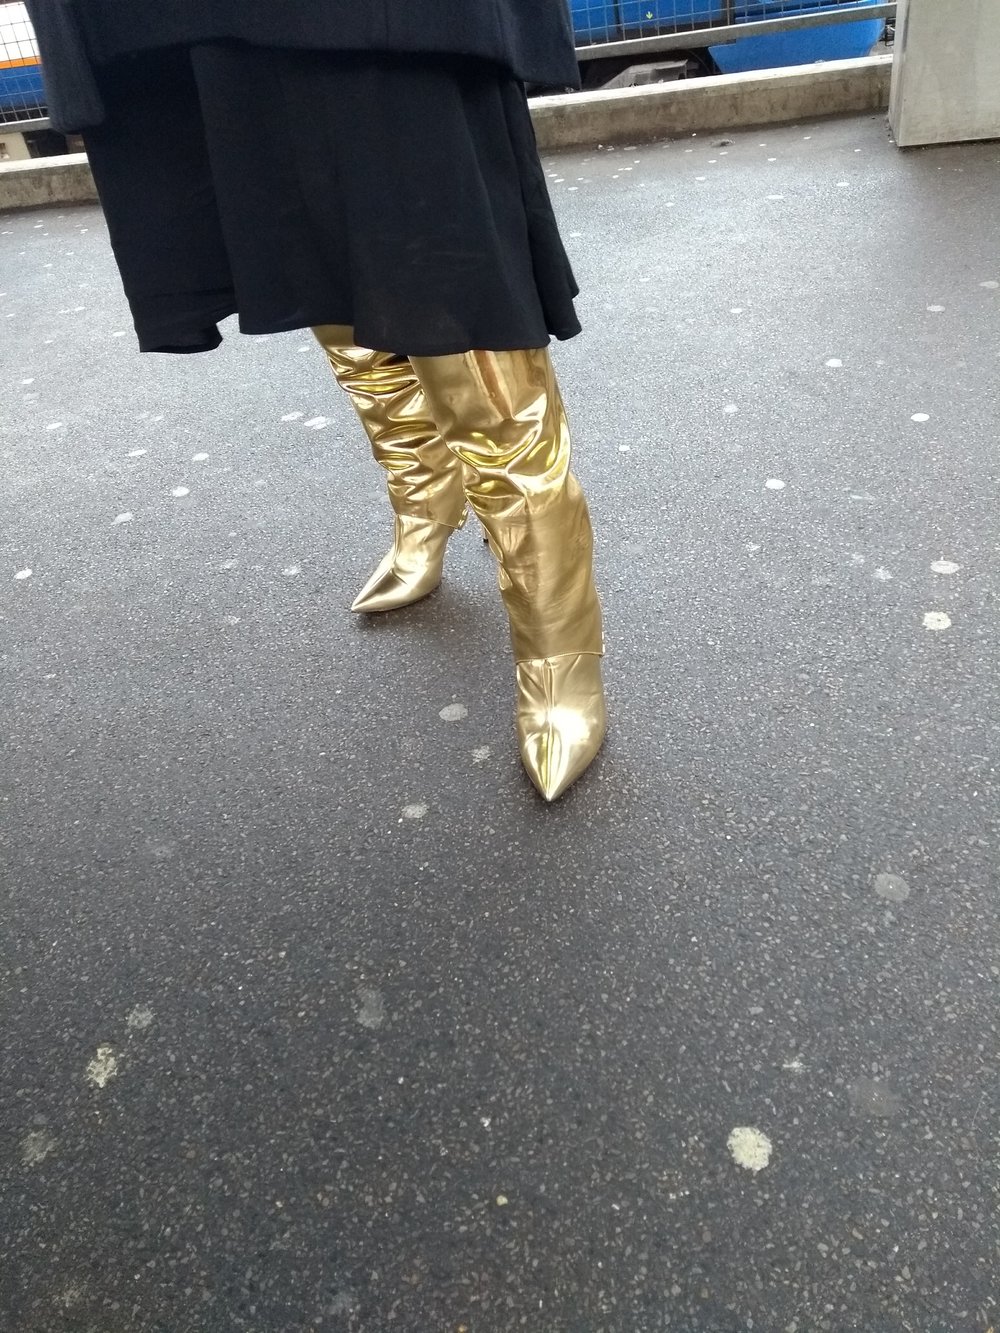  Epic distracting Golden boots of Wonder! 